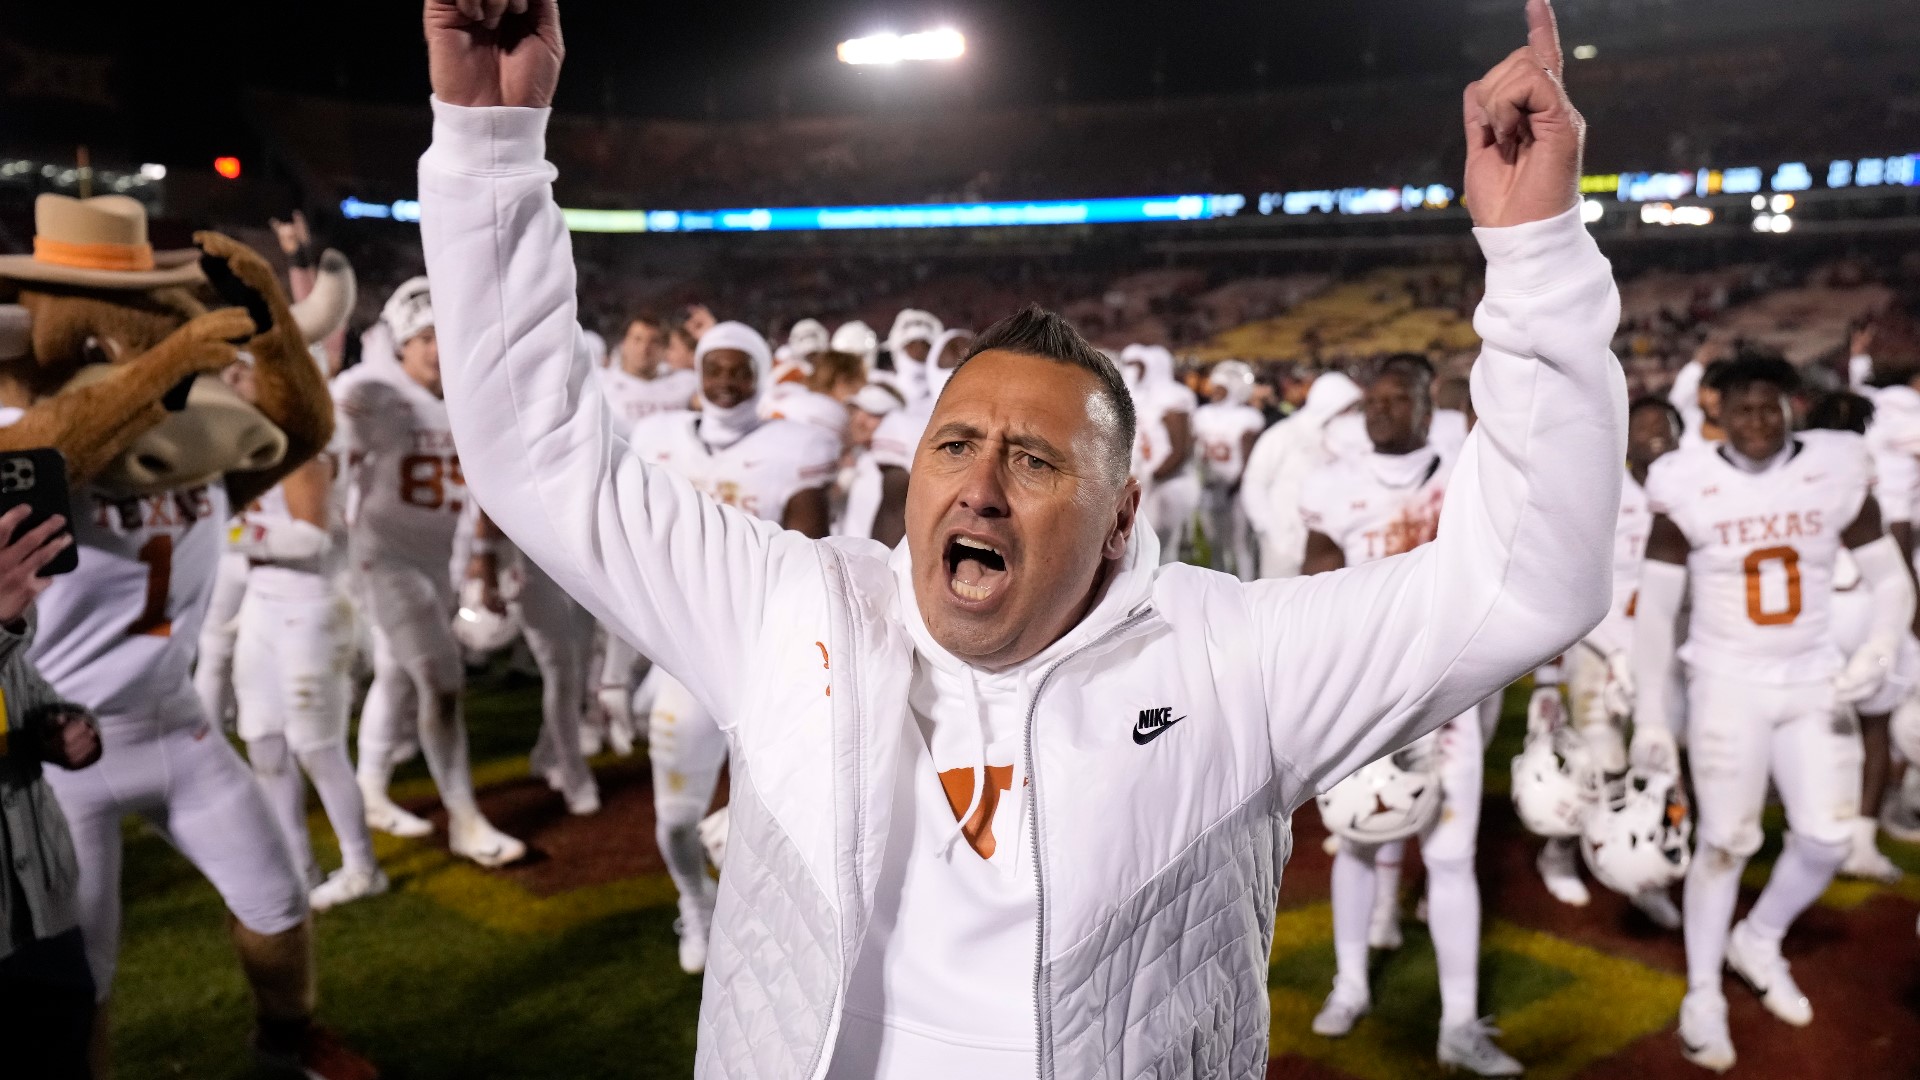 Sarkisian has accumulated a 25-14 record with the Longhorns, leading the program to its first-ever College Football Playoff appearance in 2023.